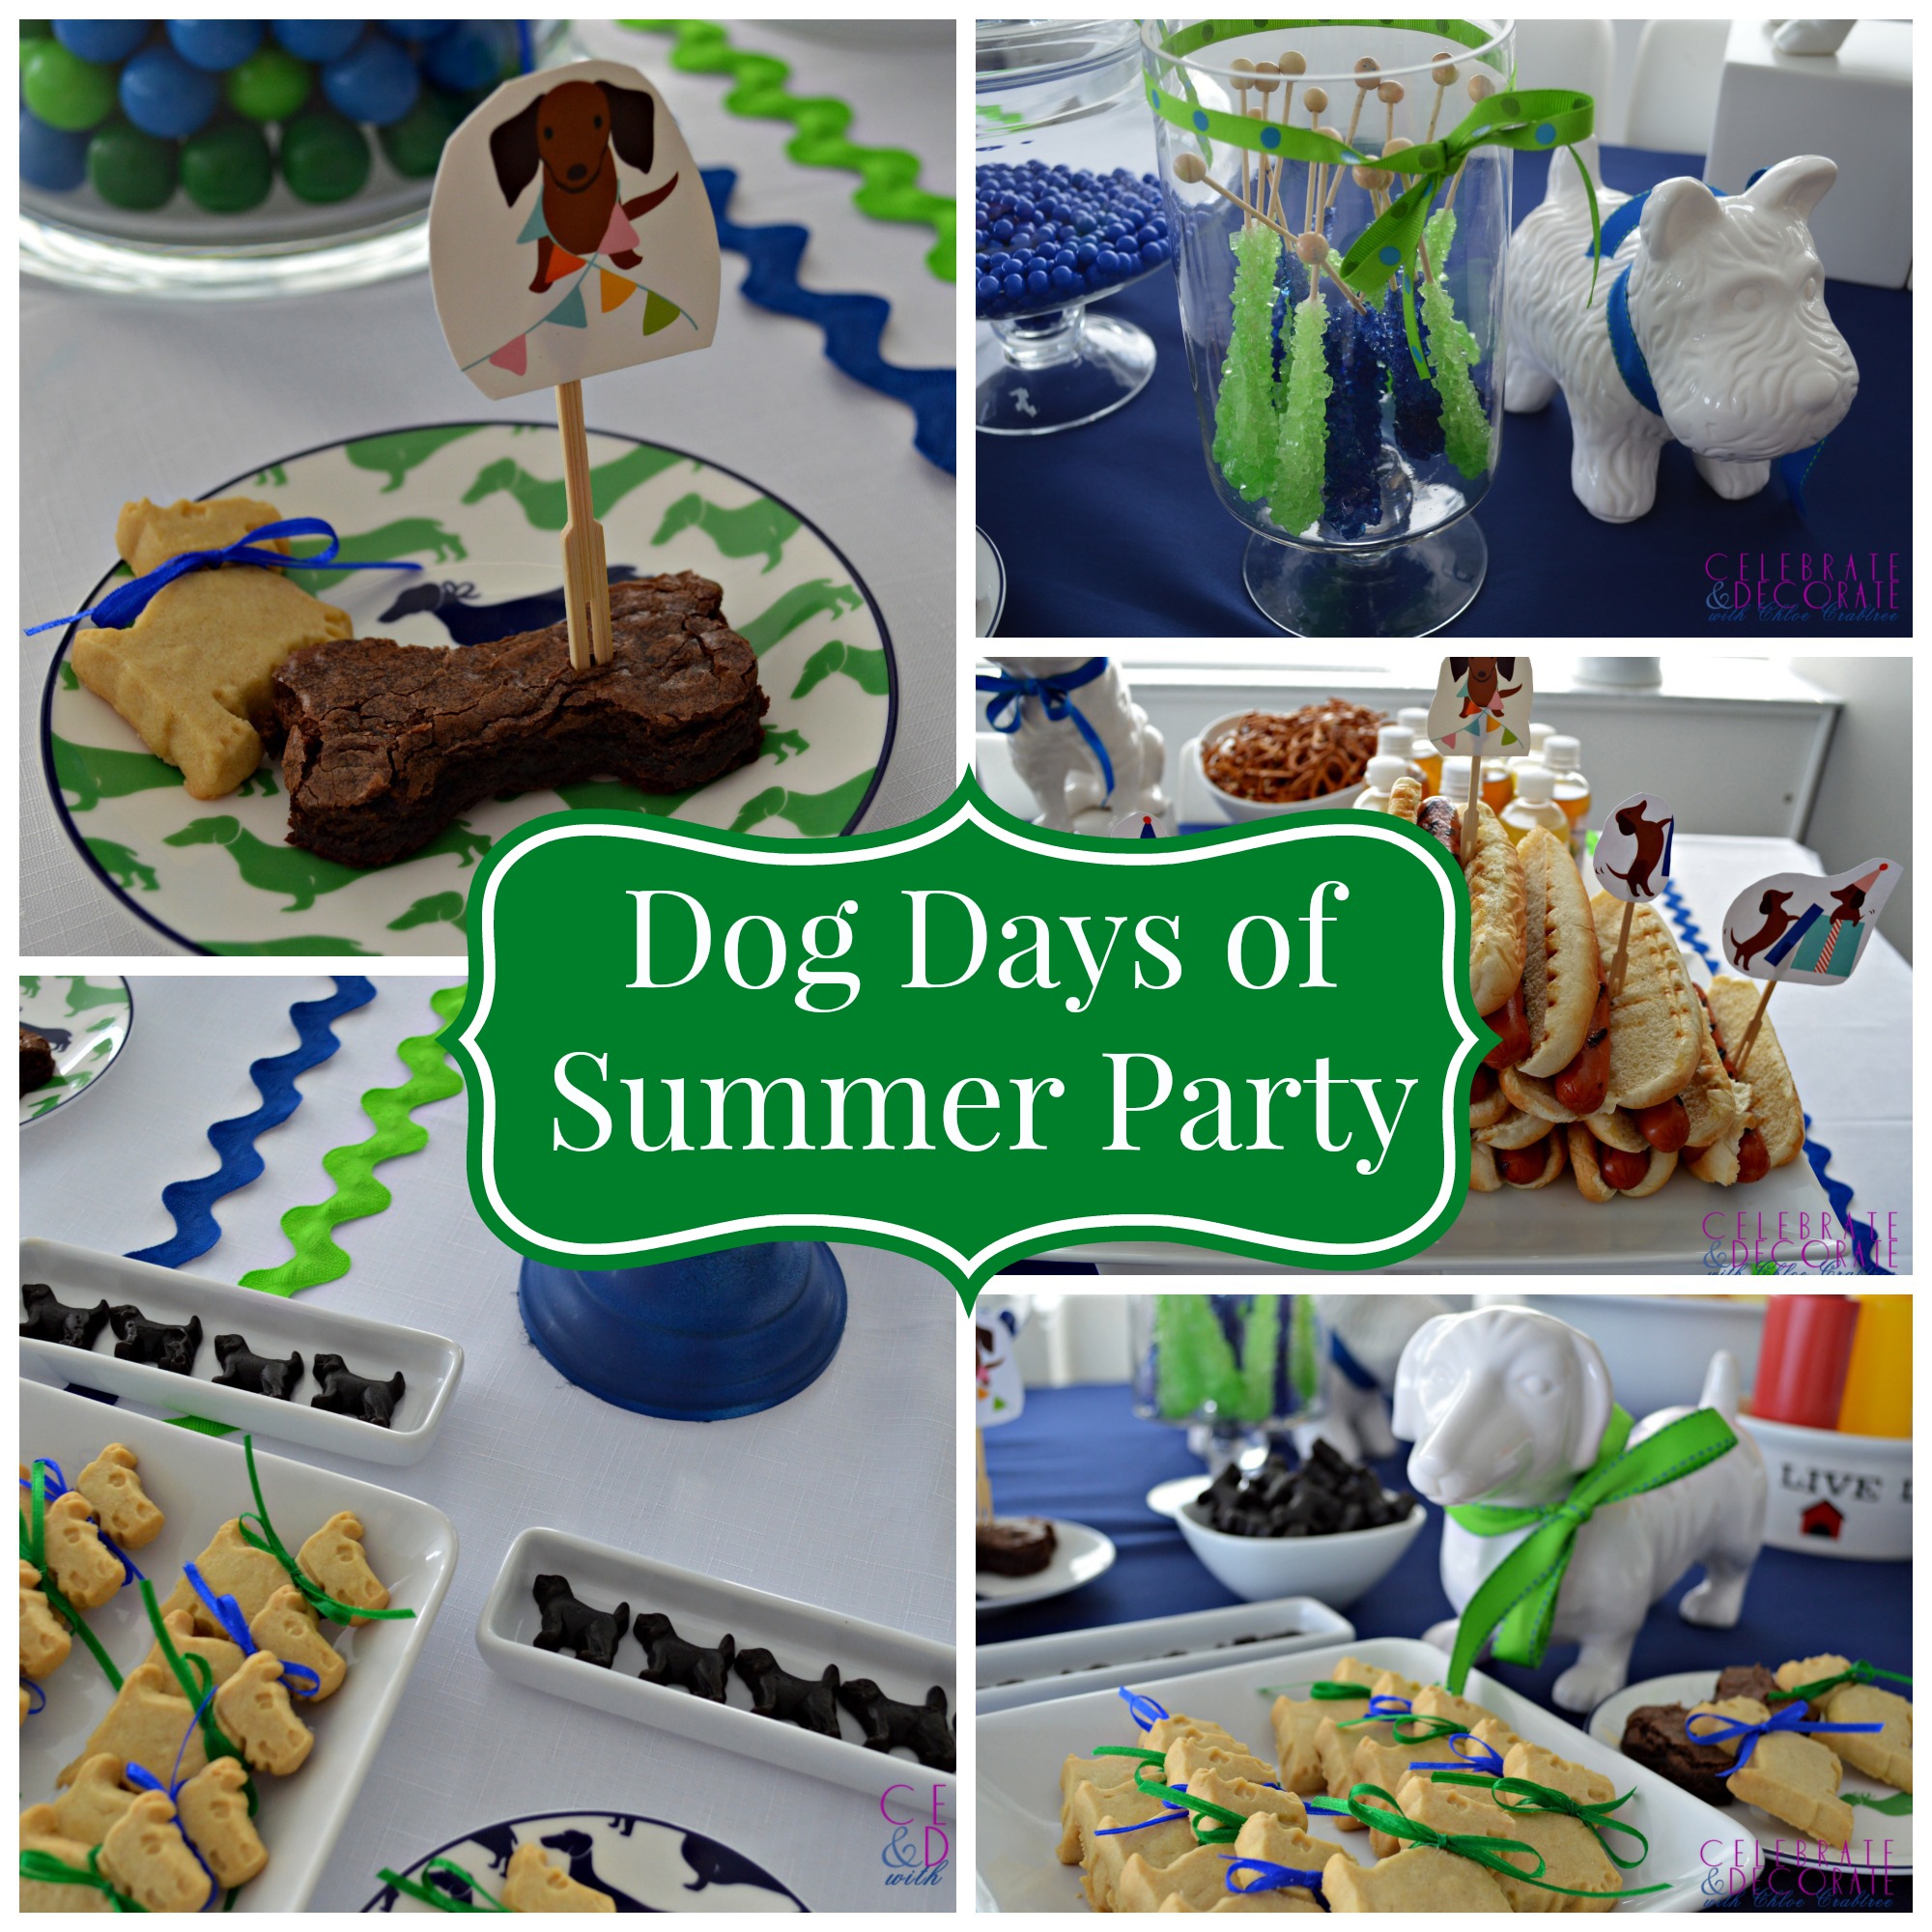 Dog Days of Summer Party